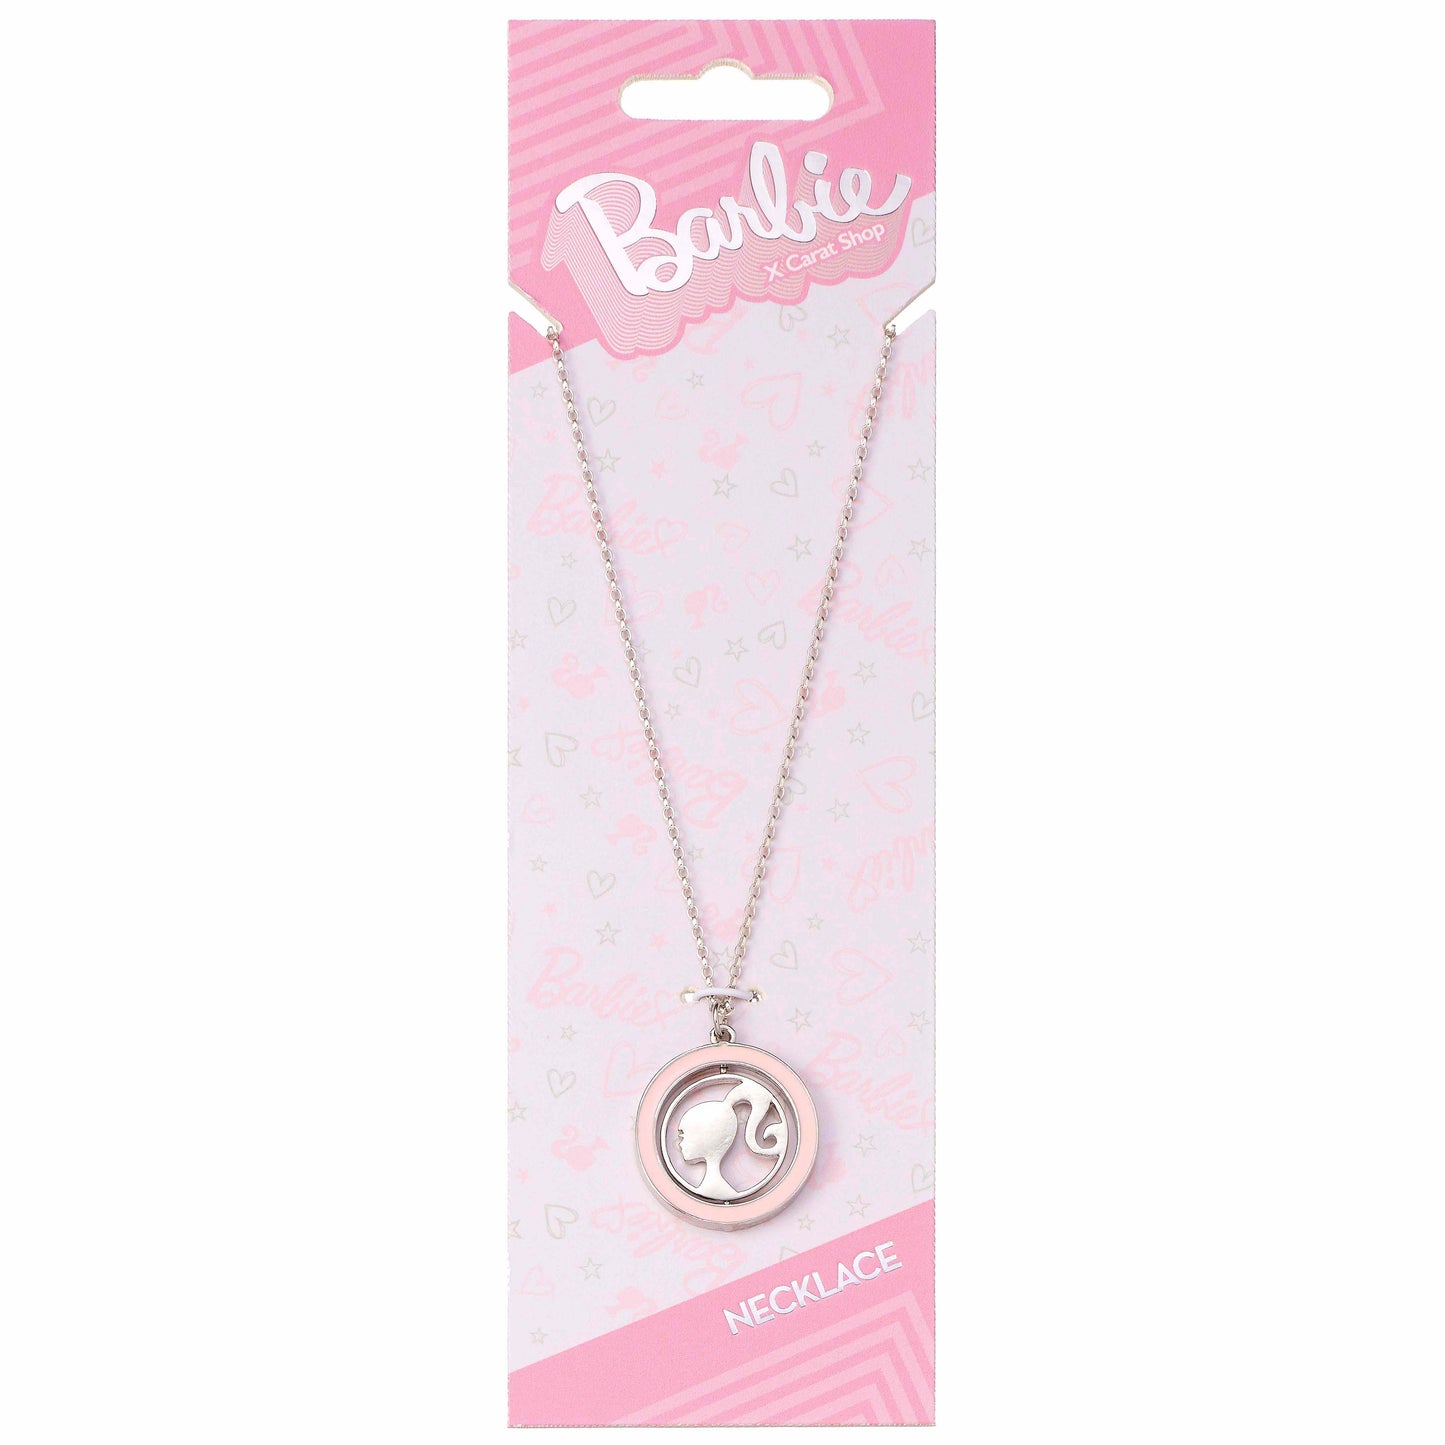 Barbie™️ Spinning Silhouette Necklace